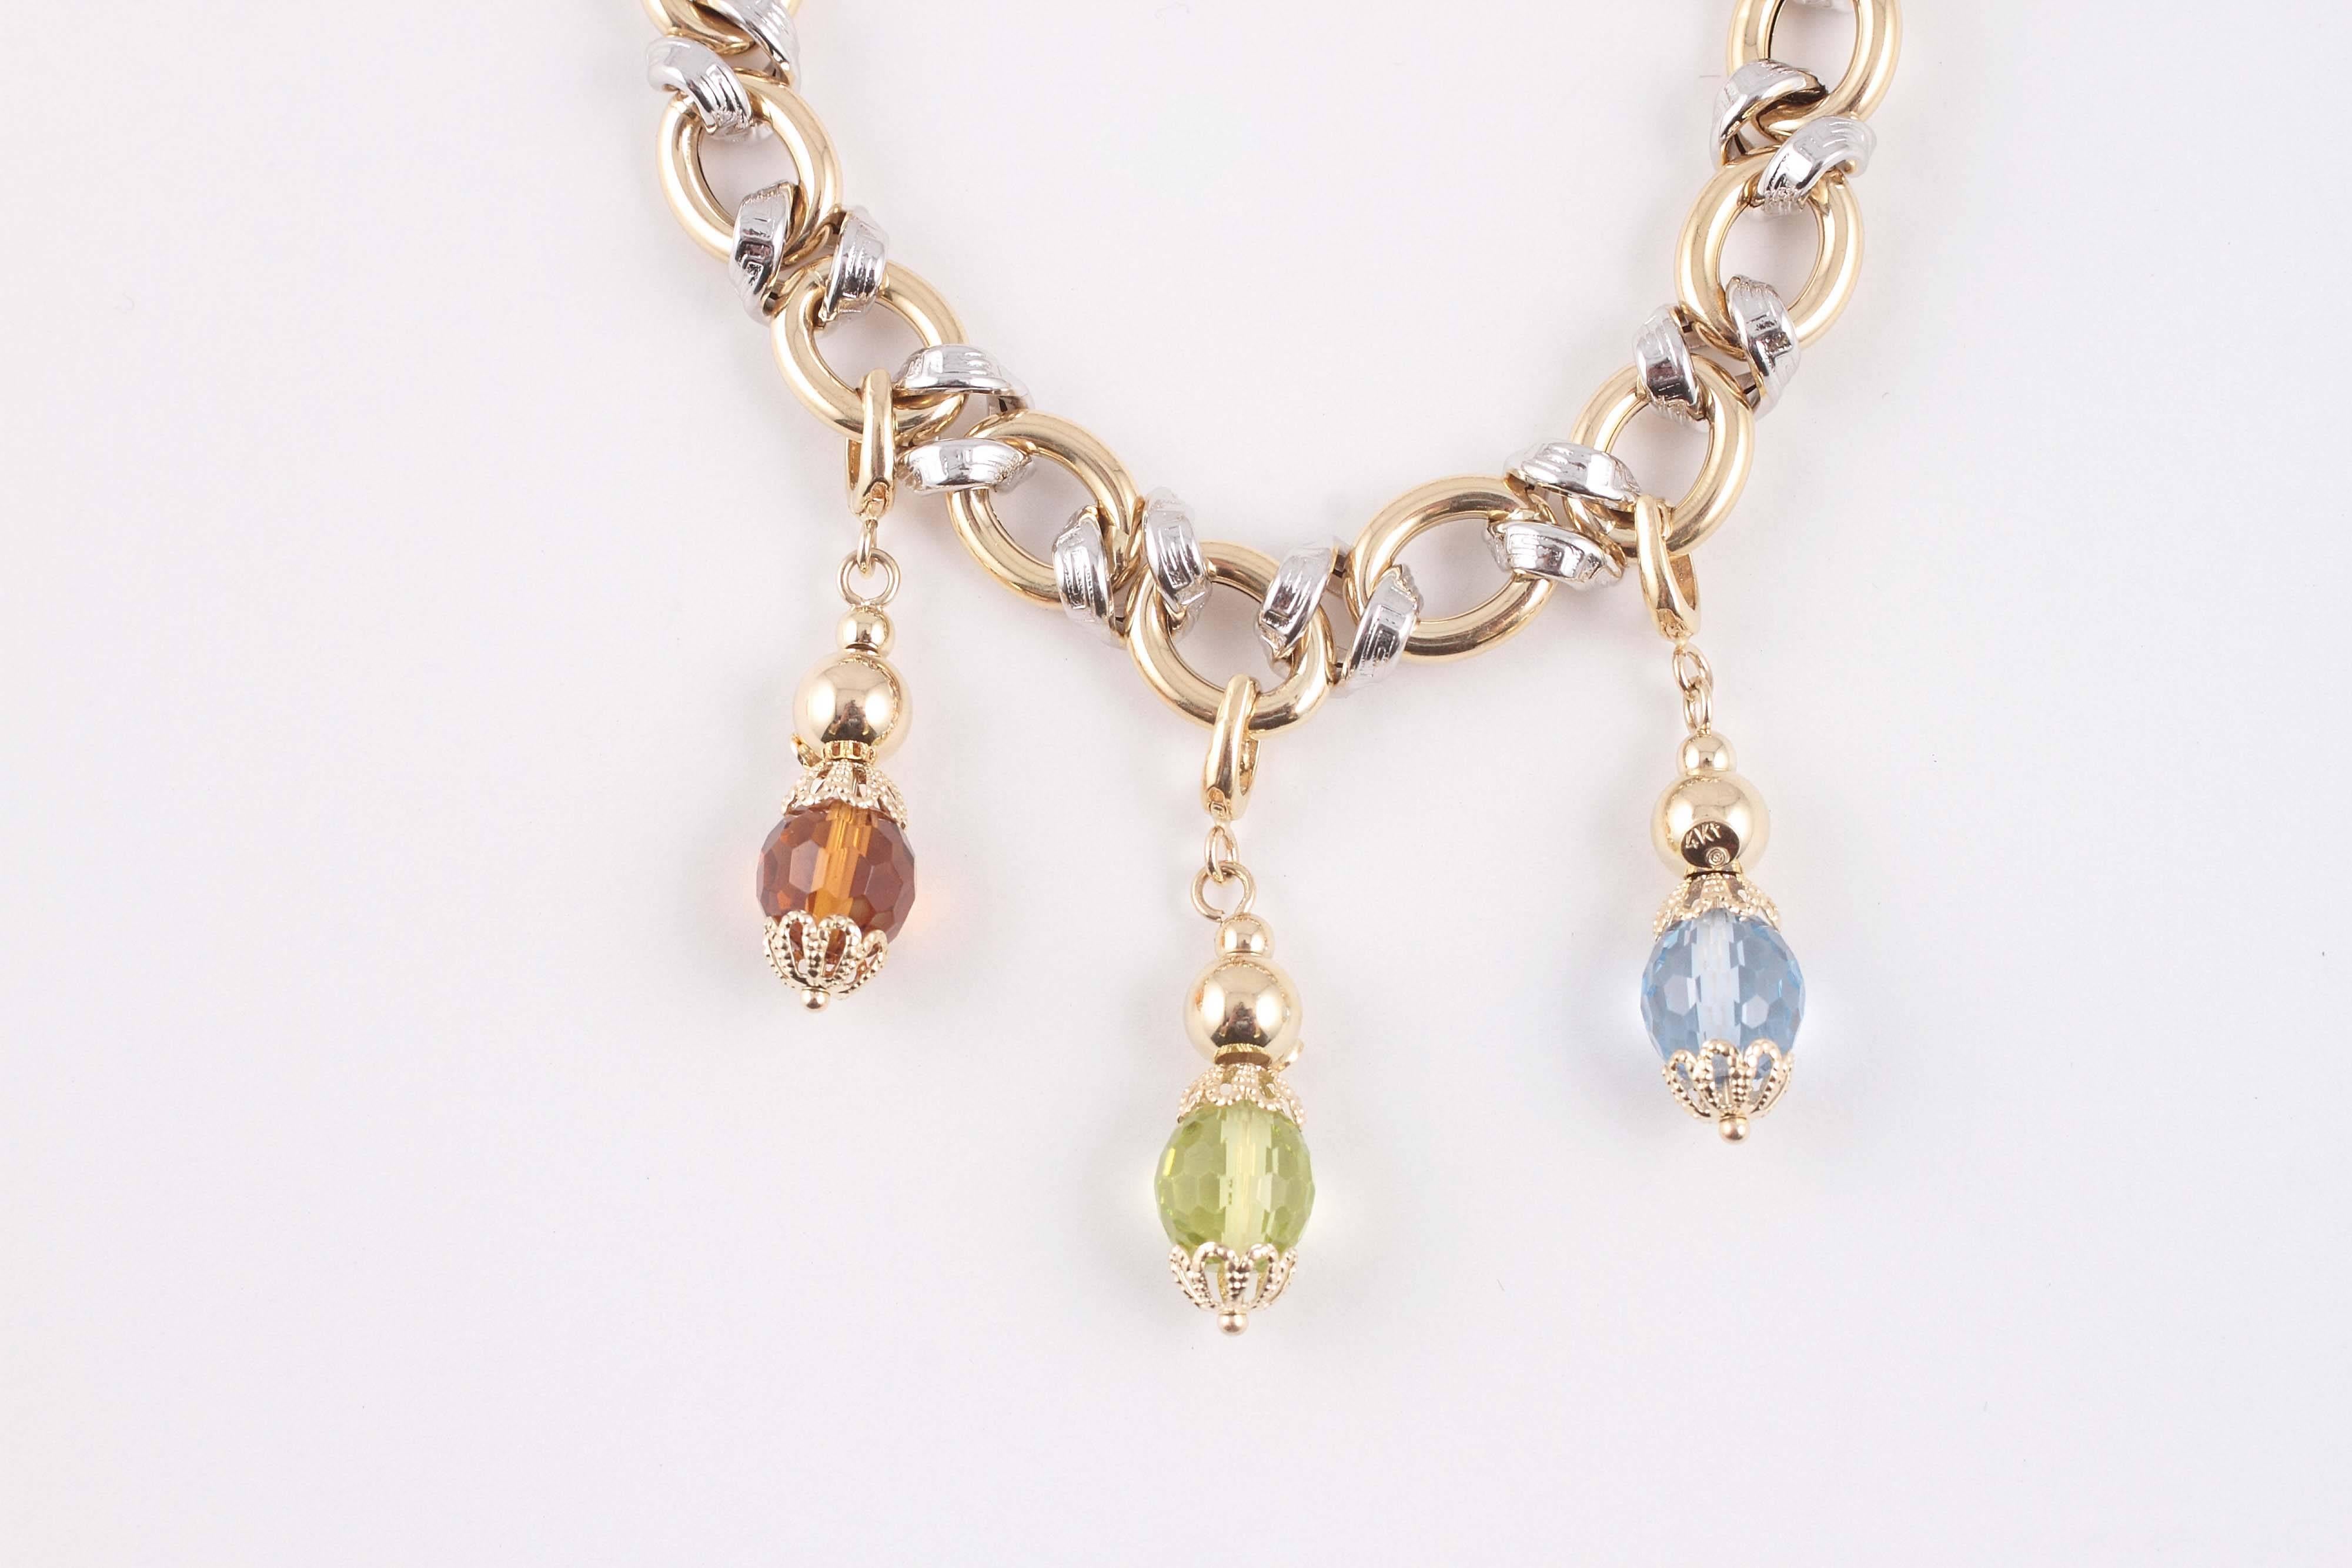 Fun and light, with faceted gemstone drops in Peridot, Citrine and Topaz!  7 1/4